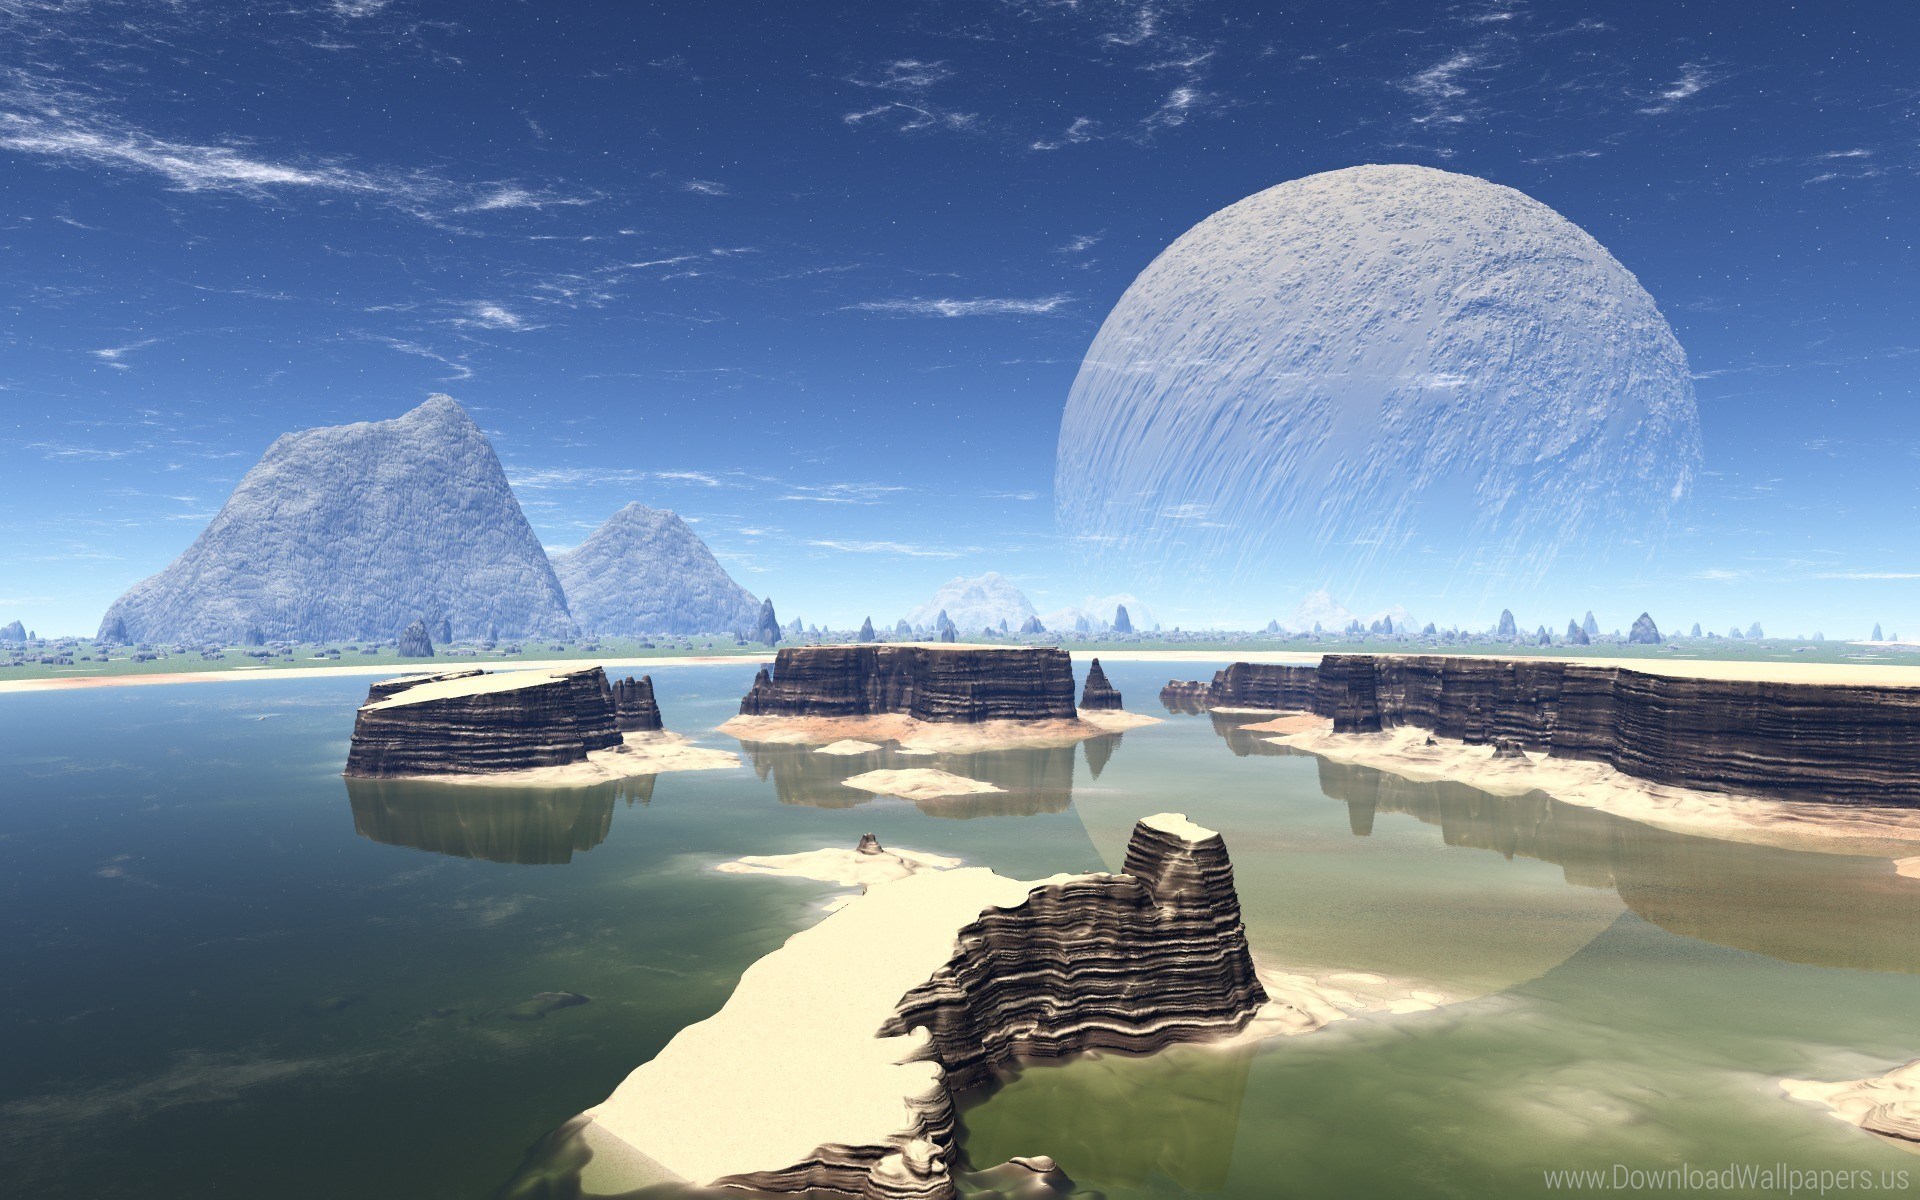 Download Original Size - Landscape From Other Planets , HD Wallpaper & Backgrounds